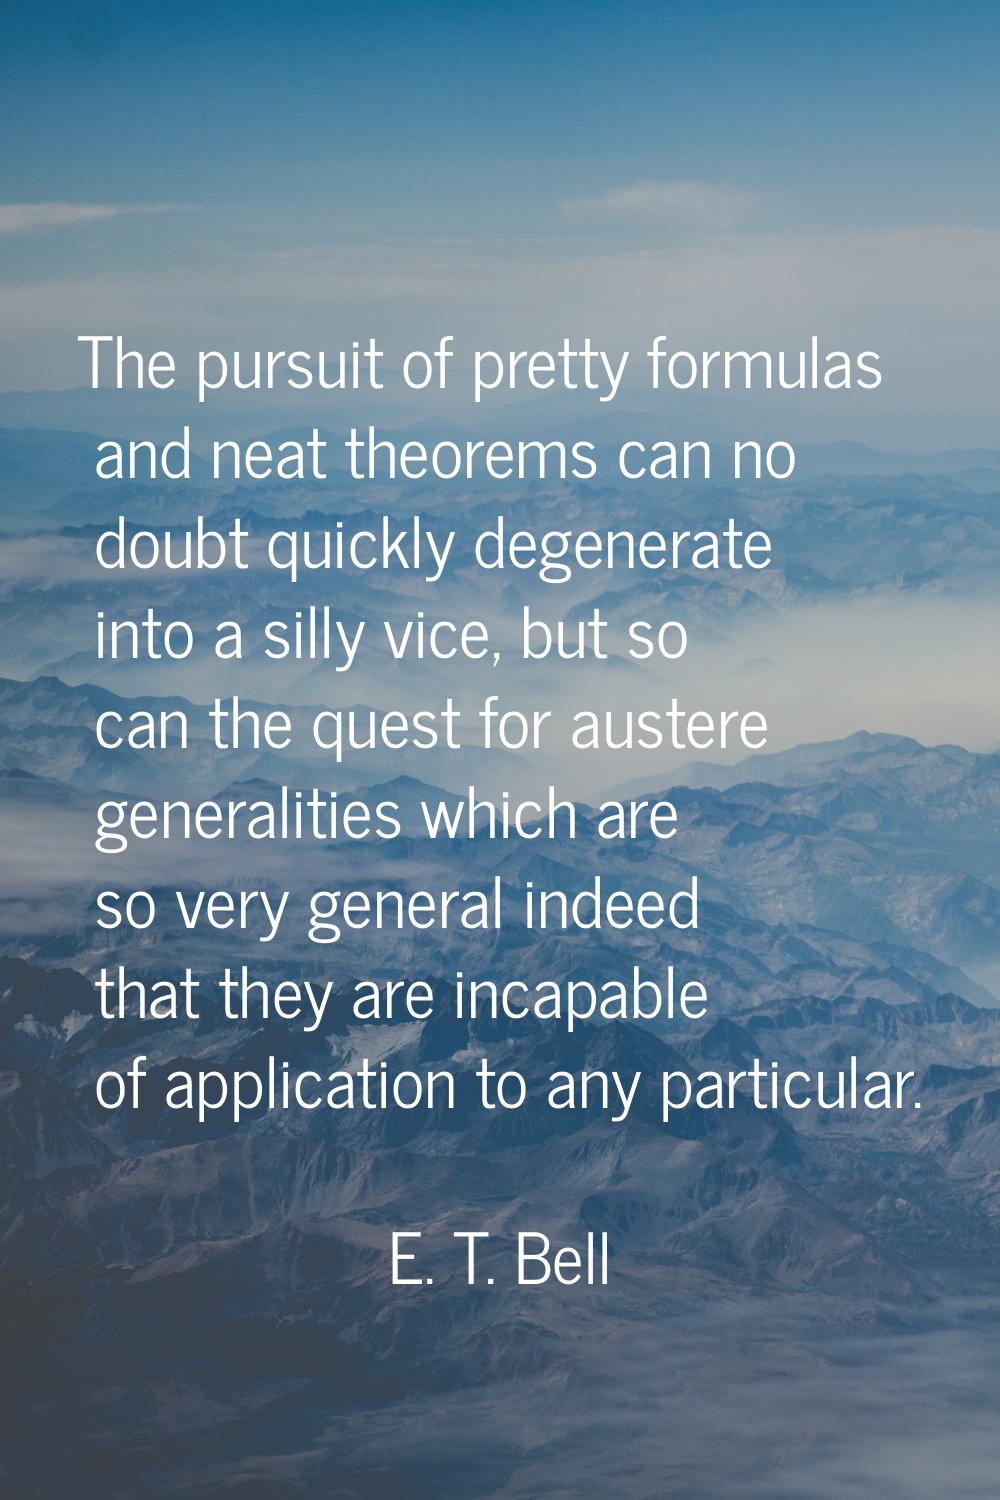 The pursuit of pretty formulas and neat theorems can no doubt quickly degenerate into a silly vice,